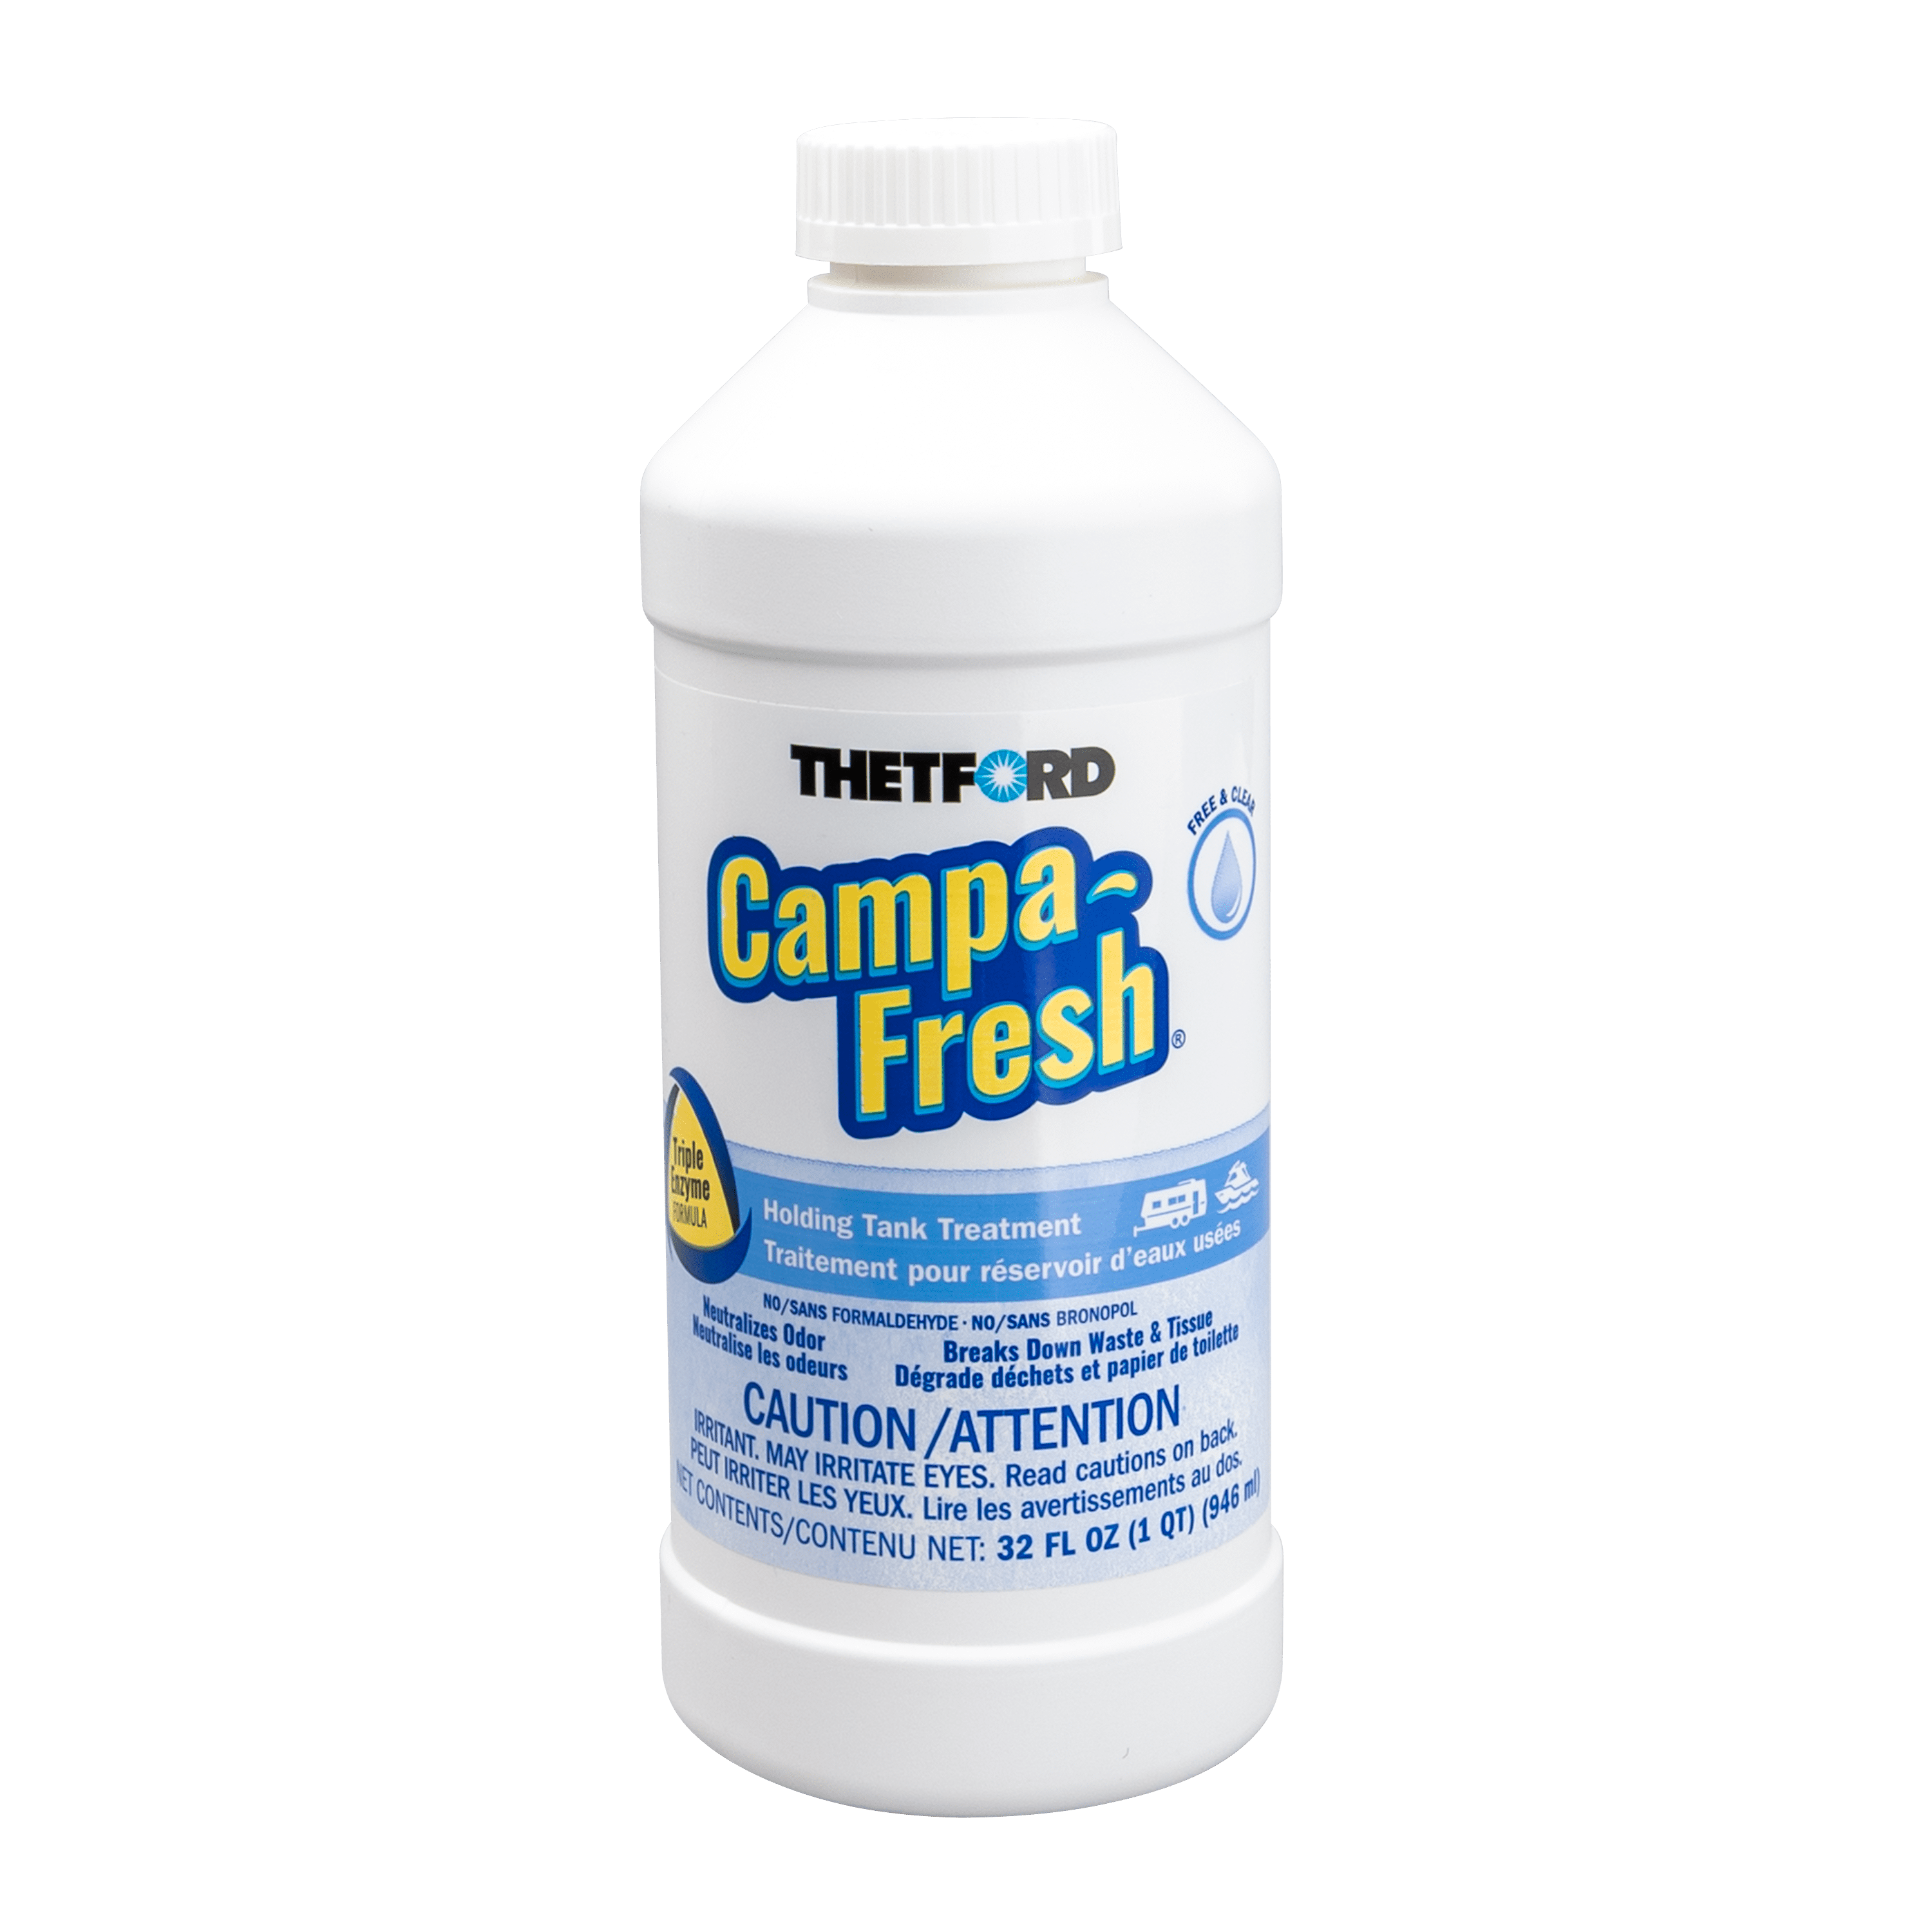 Thetford Products - Campsite Wholesale